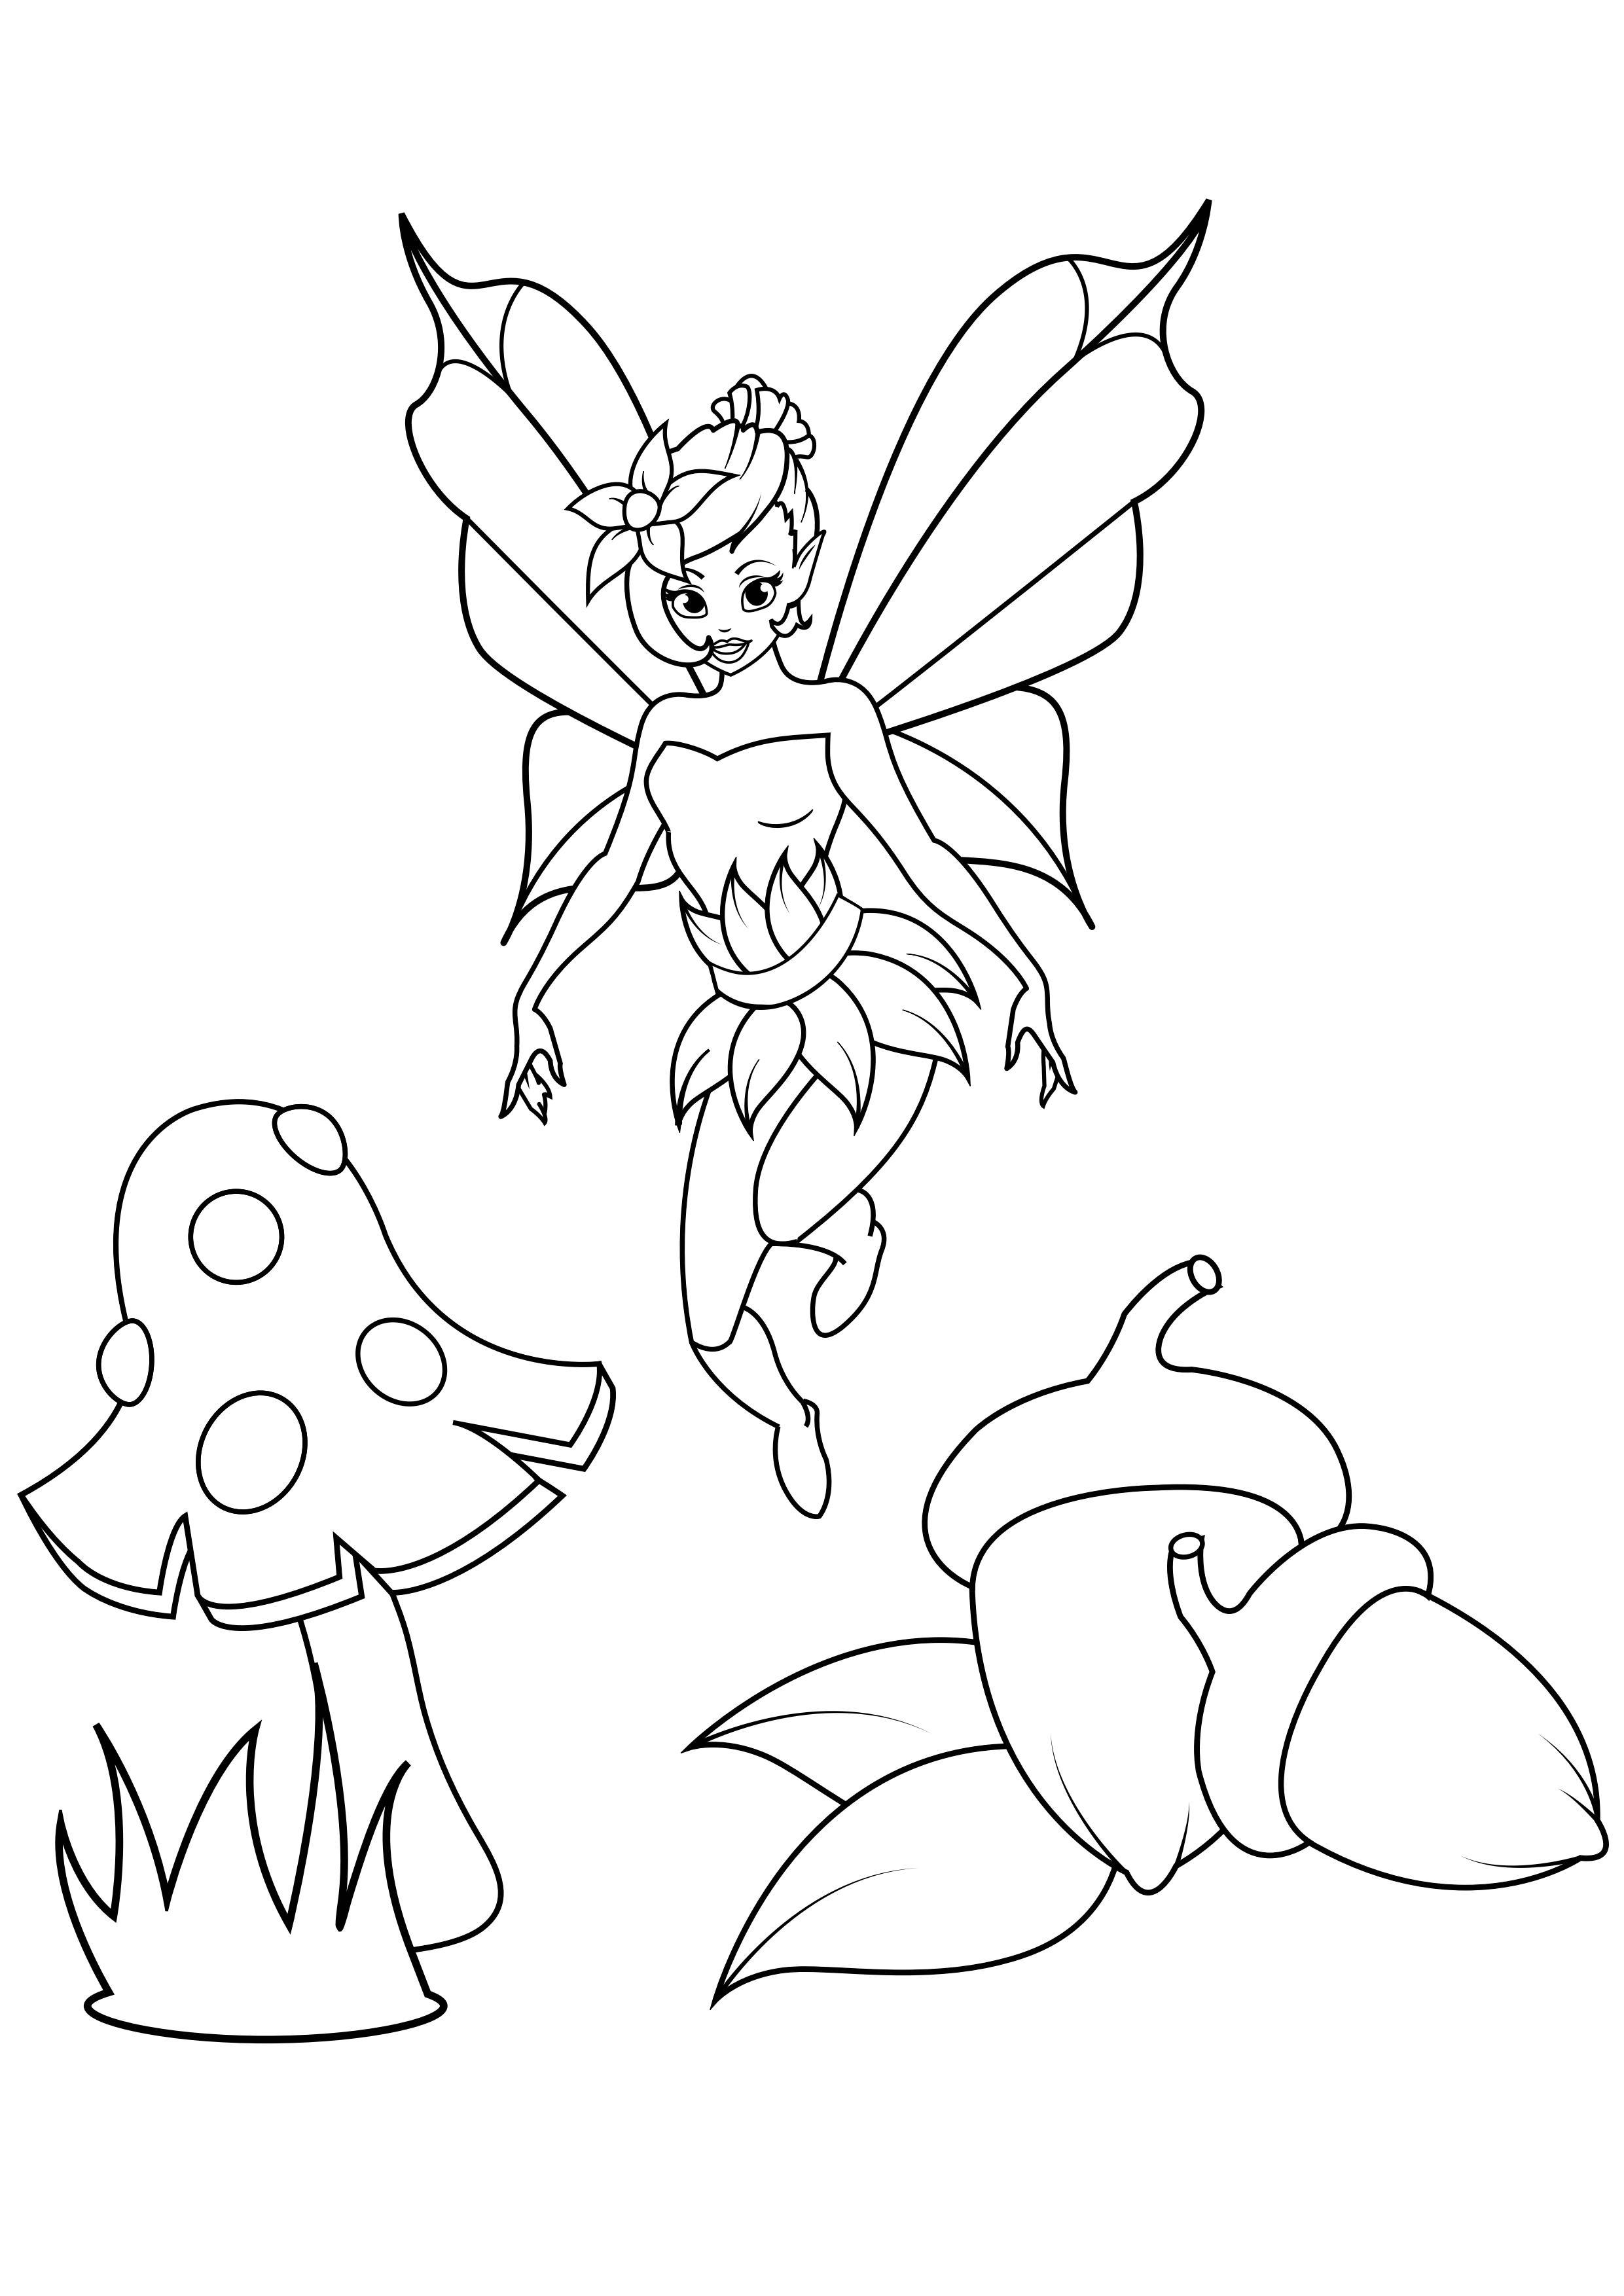 Coloring page fairy in autumn